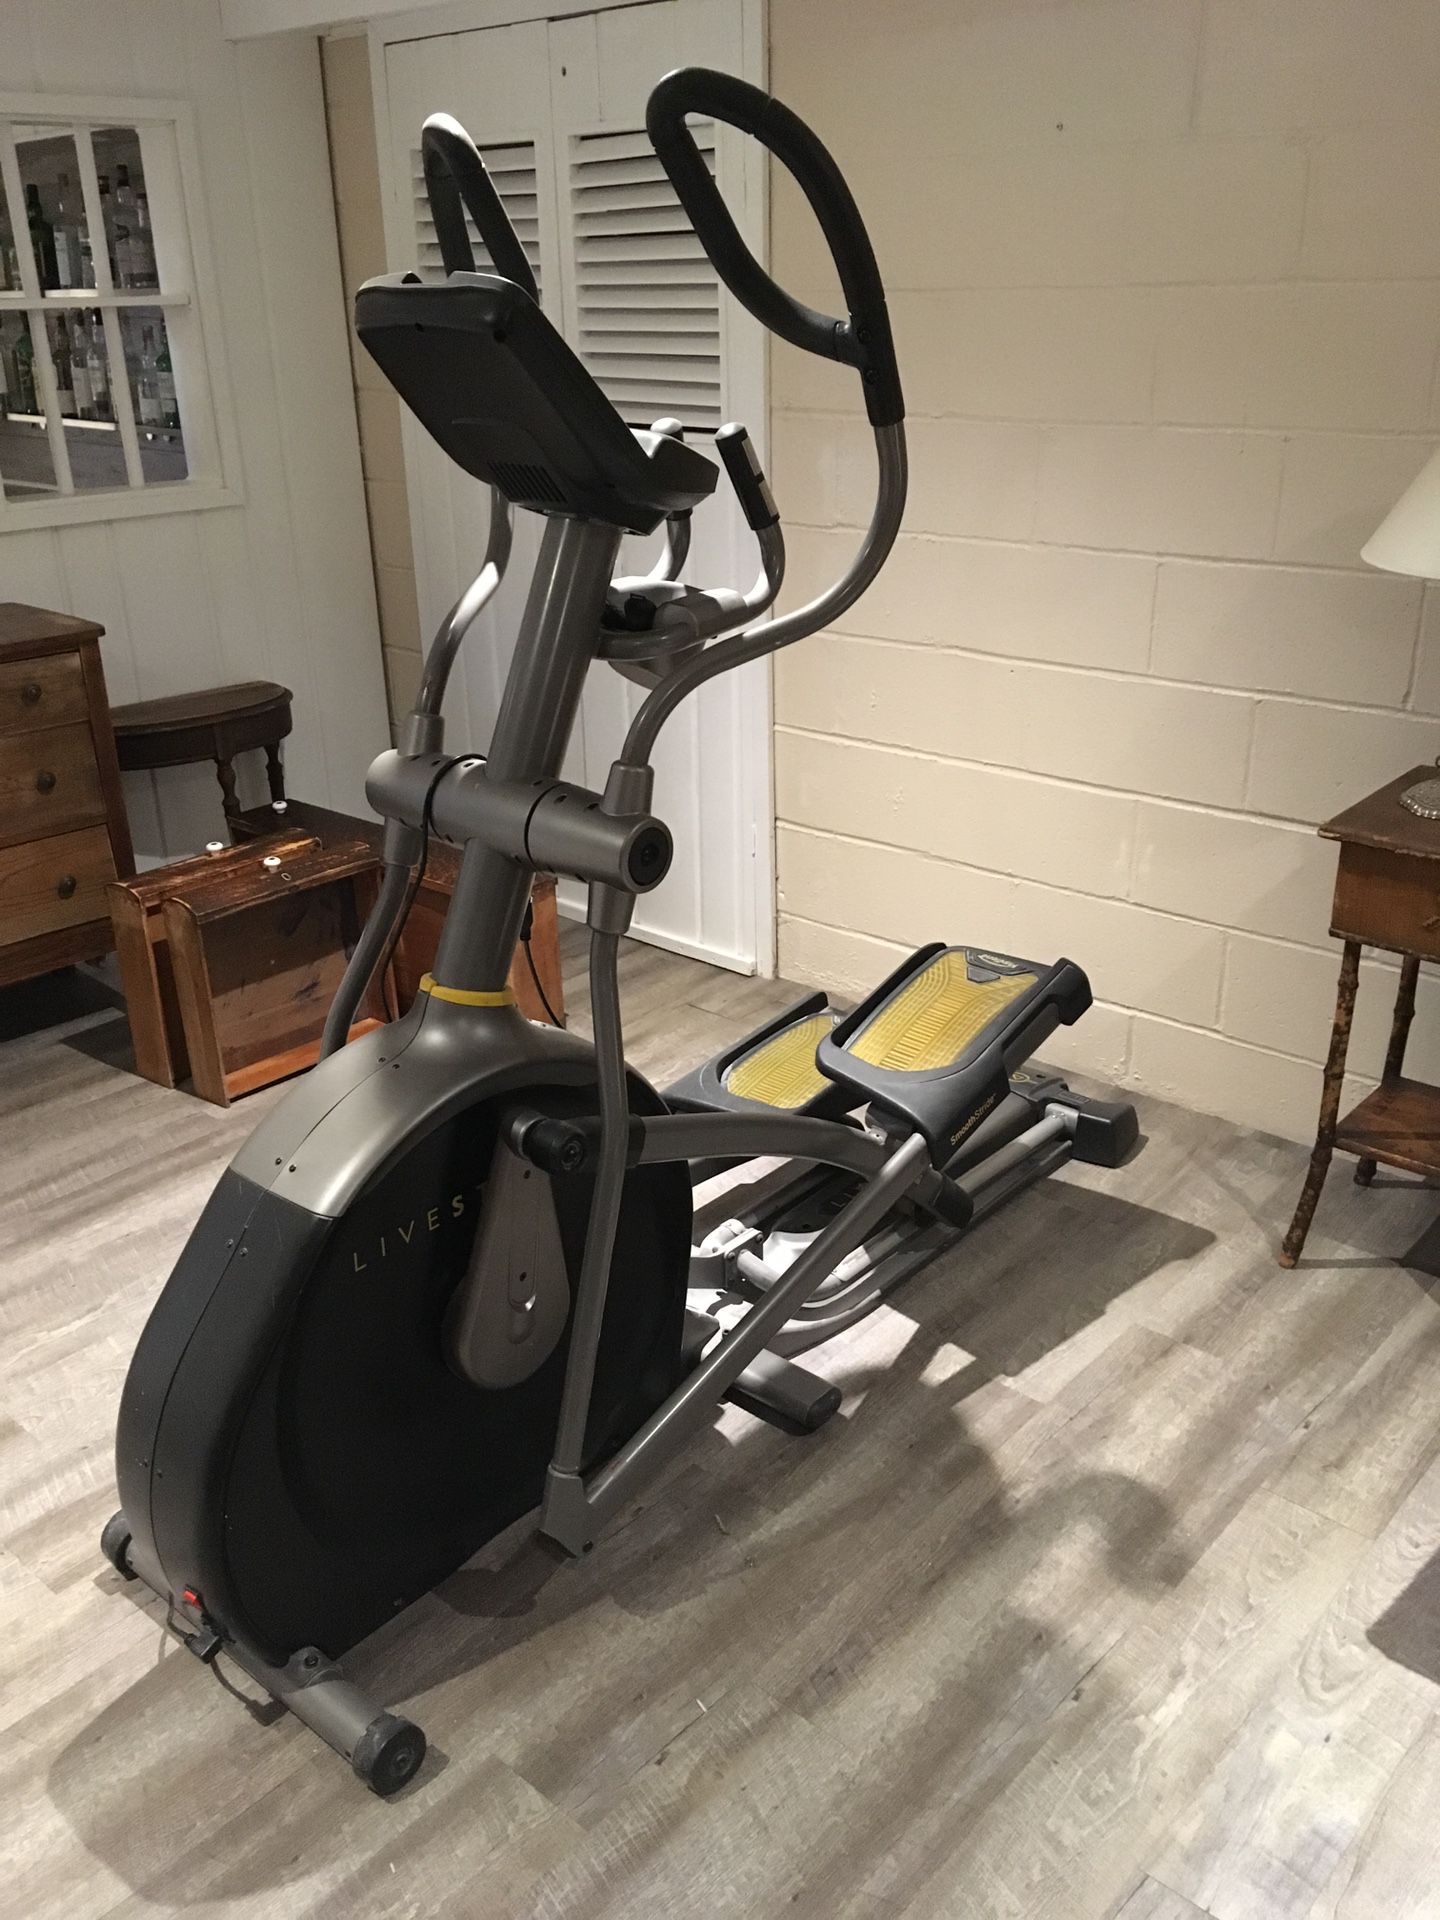 LiveStrong Elliptical Machine - Great Condition!